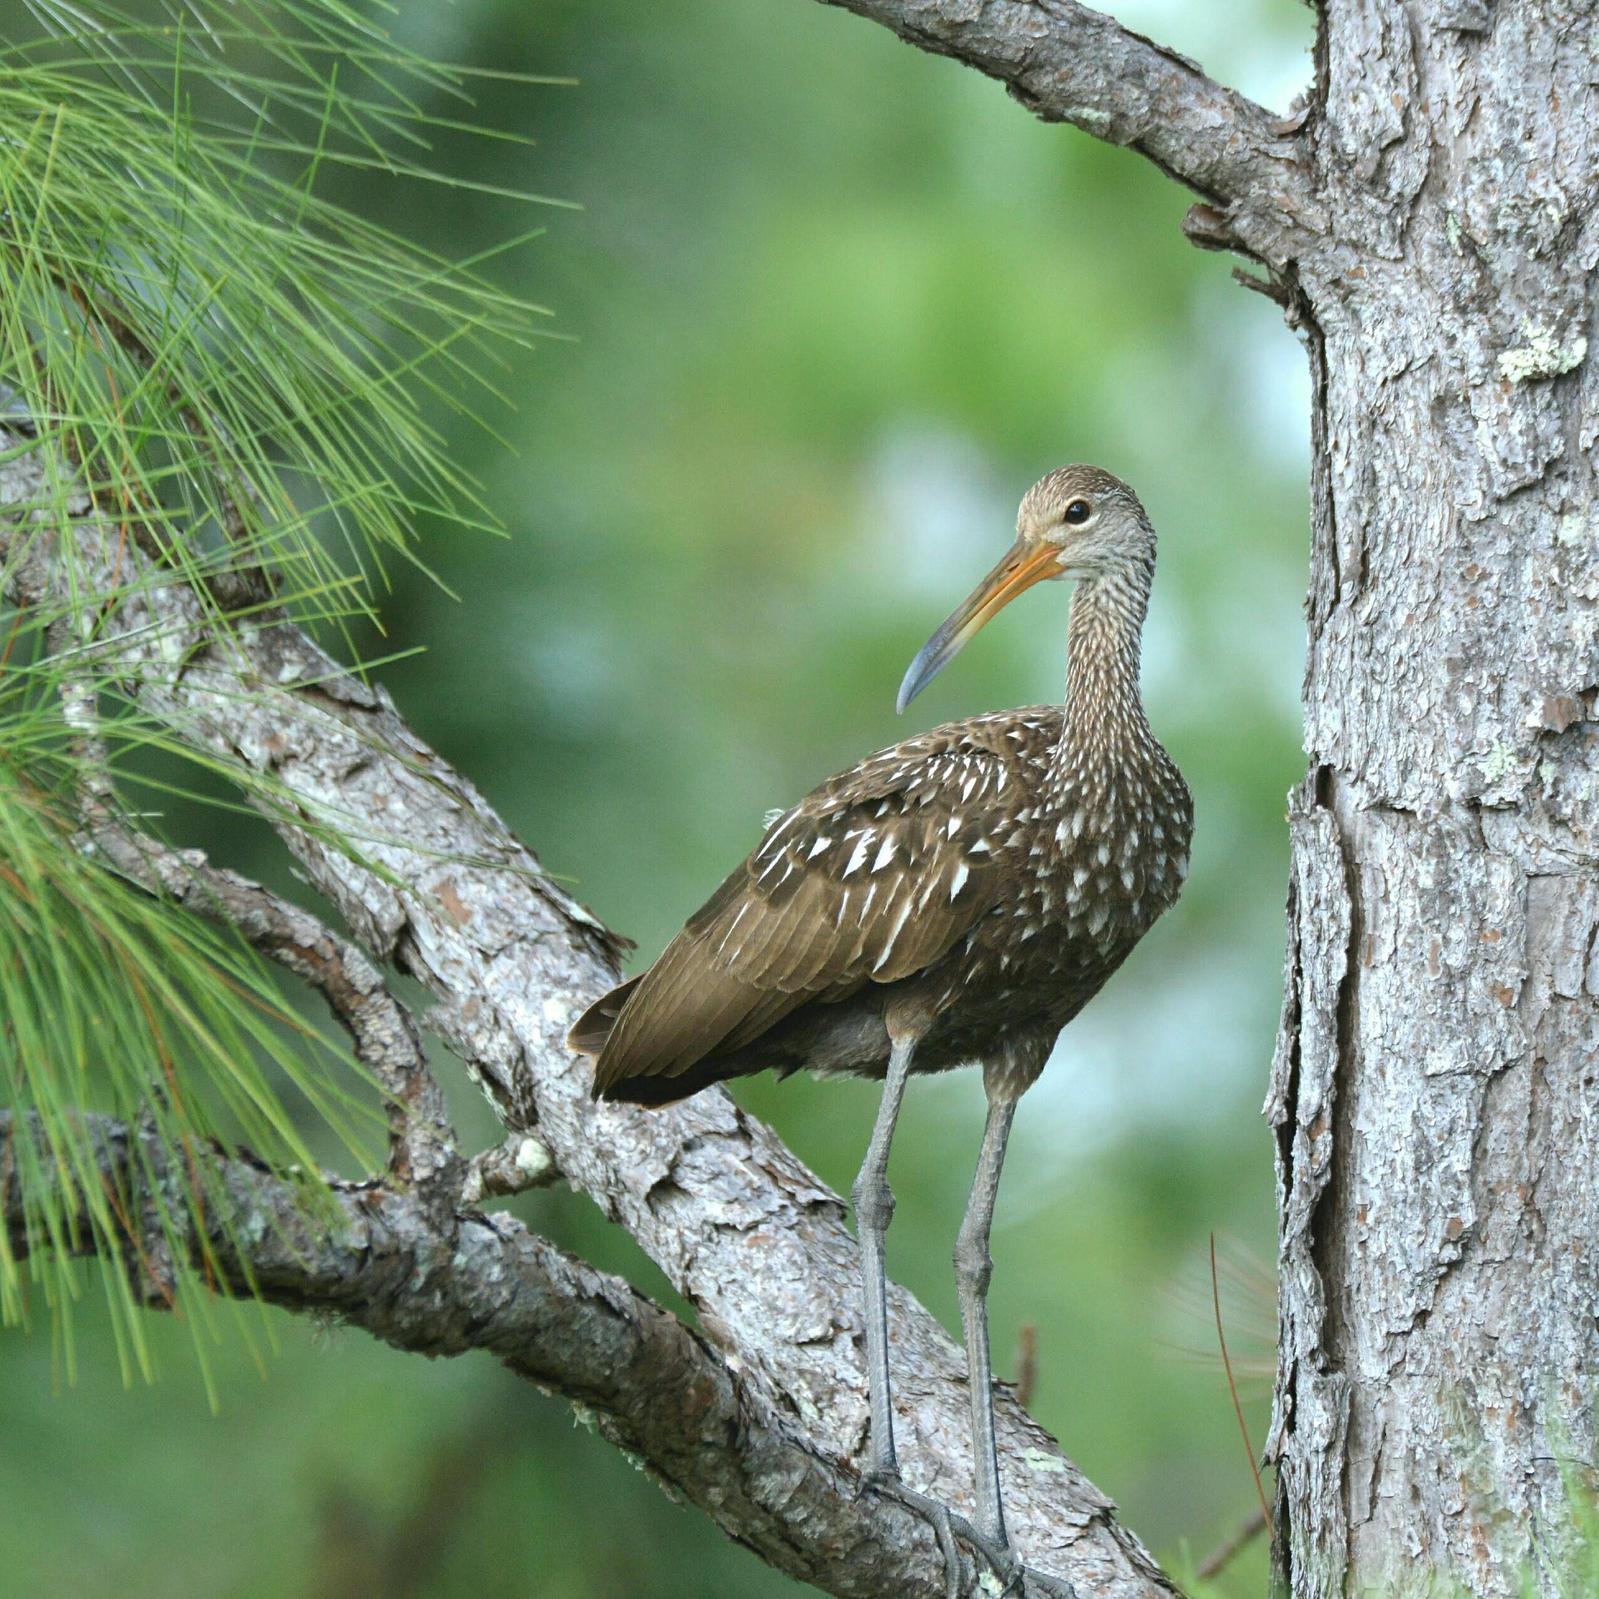 Limpkin Photo by Michael Horn